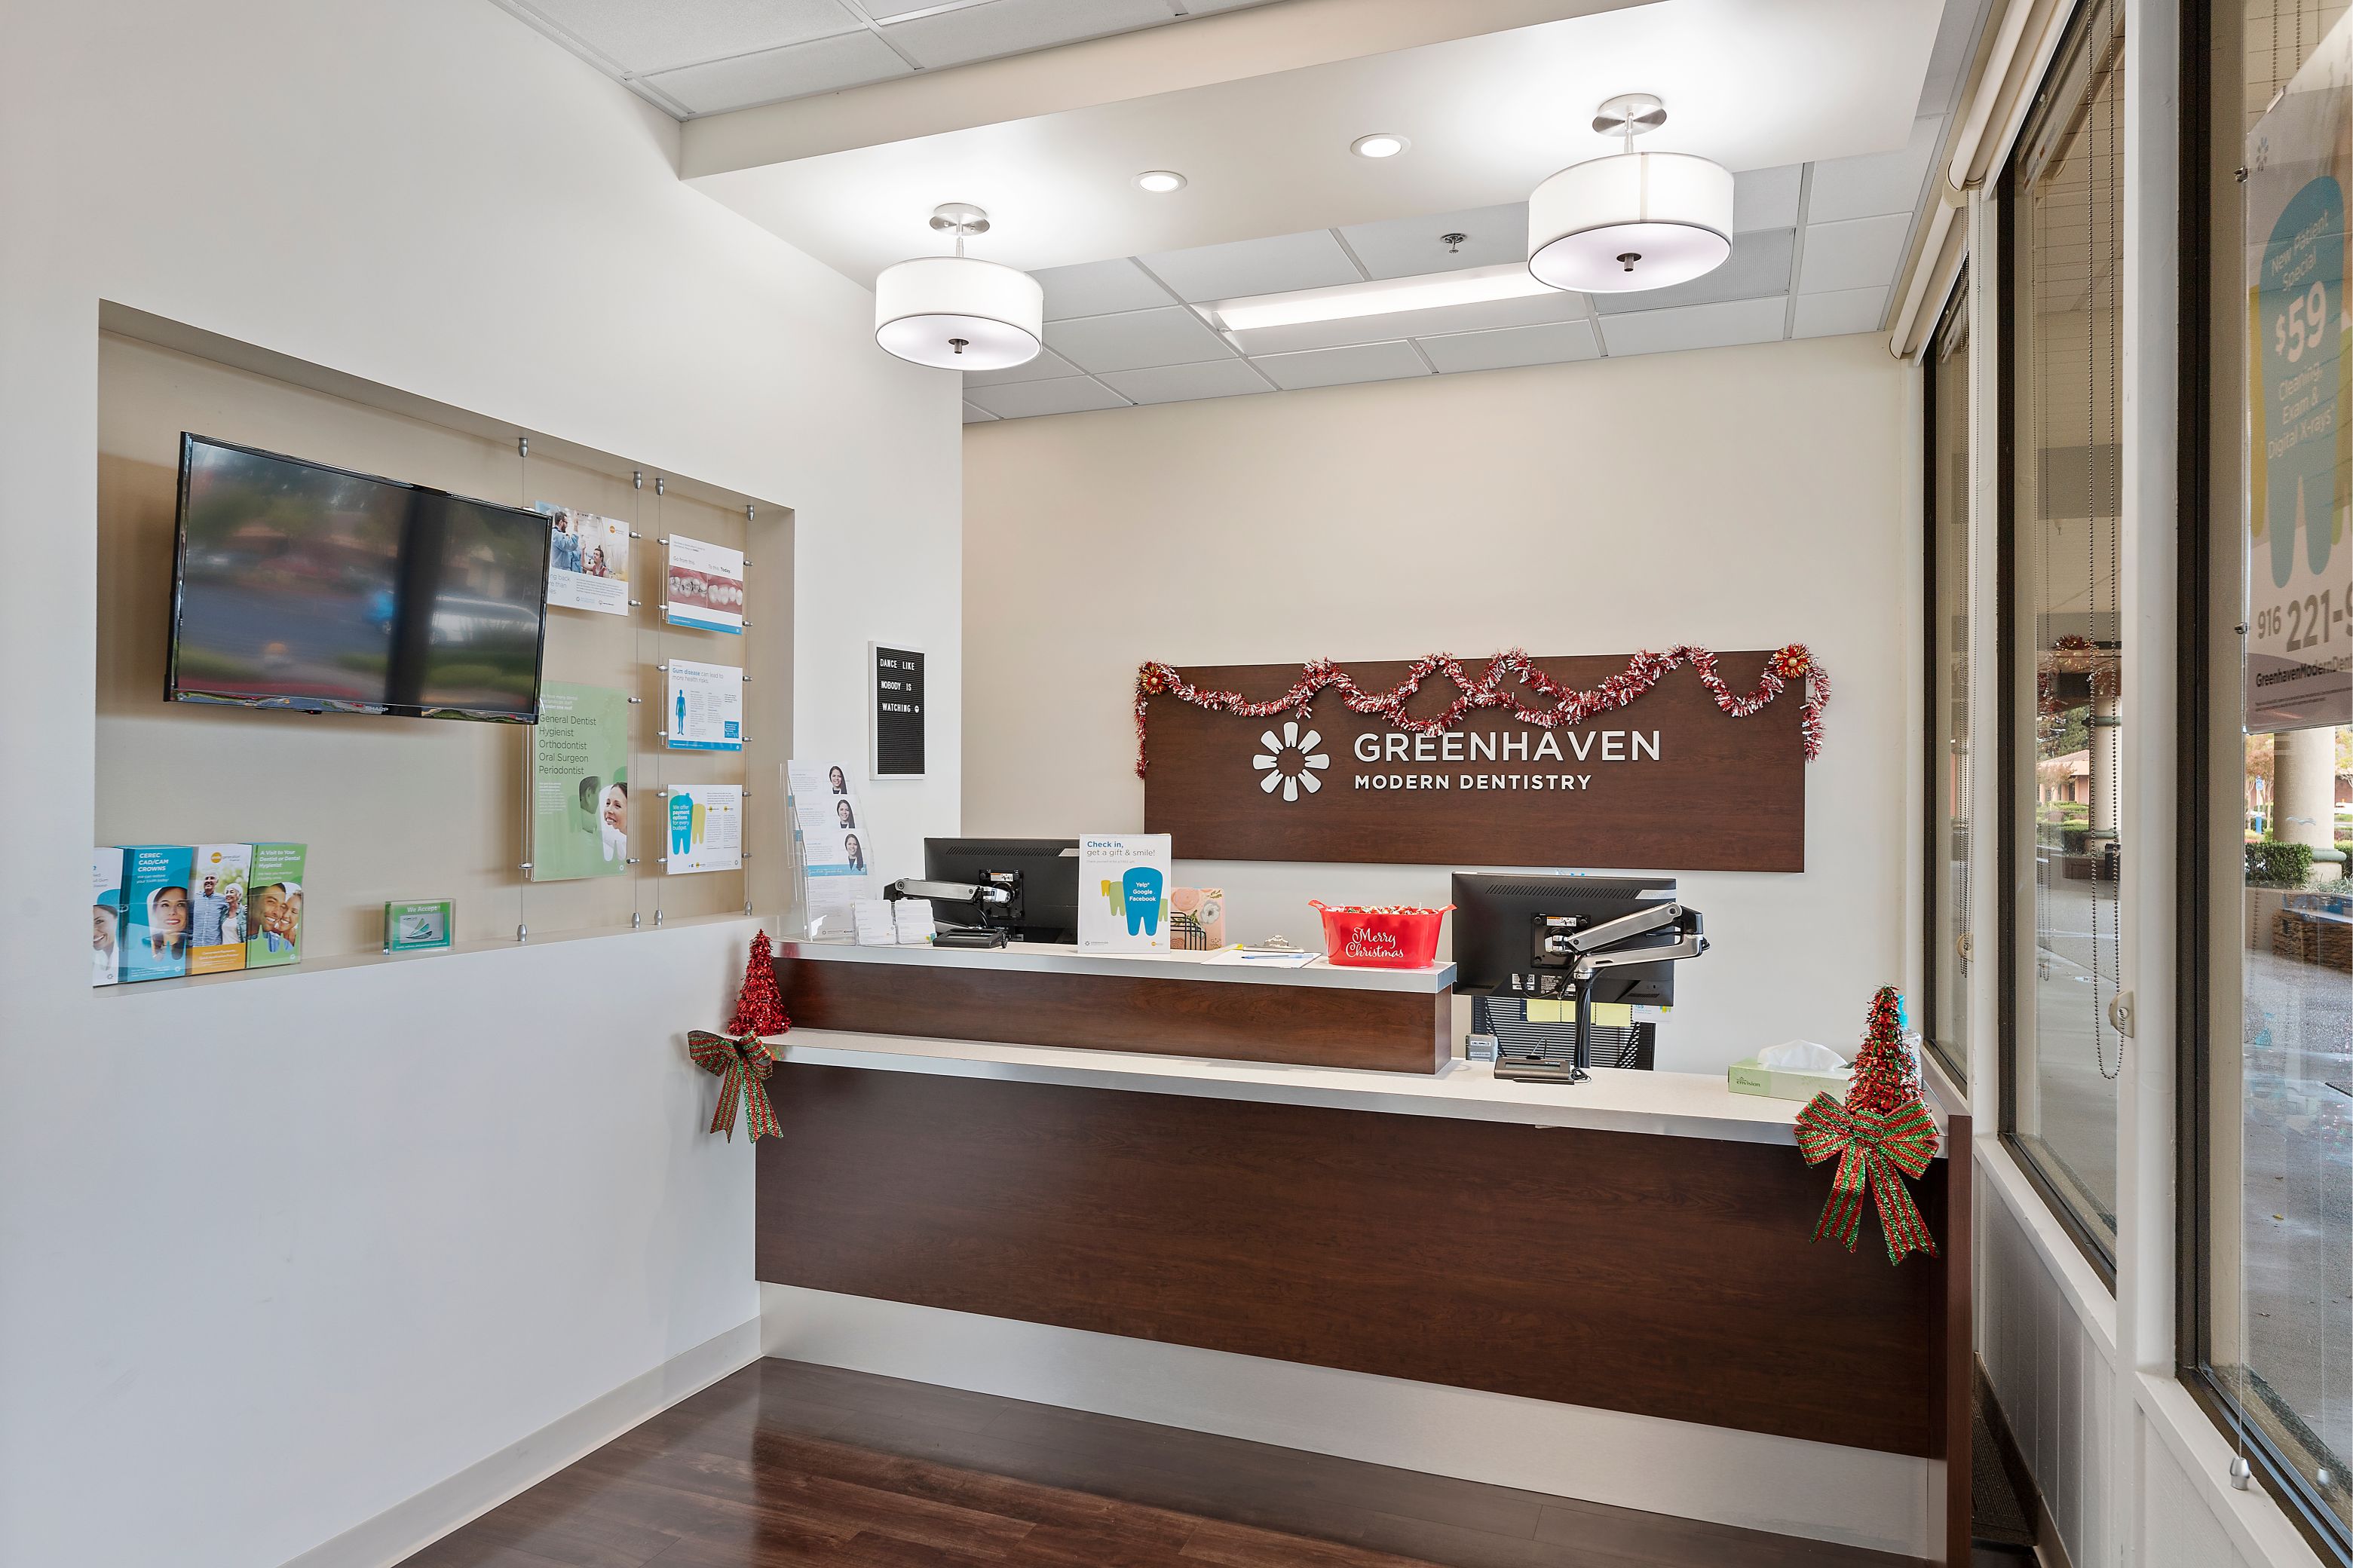 Greenhaven Modern Dentistry opened its doors to the Sacramento community in November 2019! Greenhaven Modern Dentistry Sacramento (916)221-9970